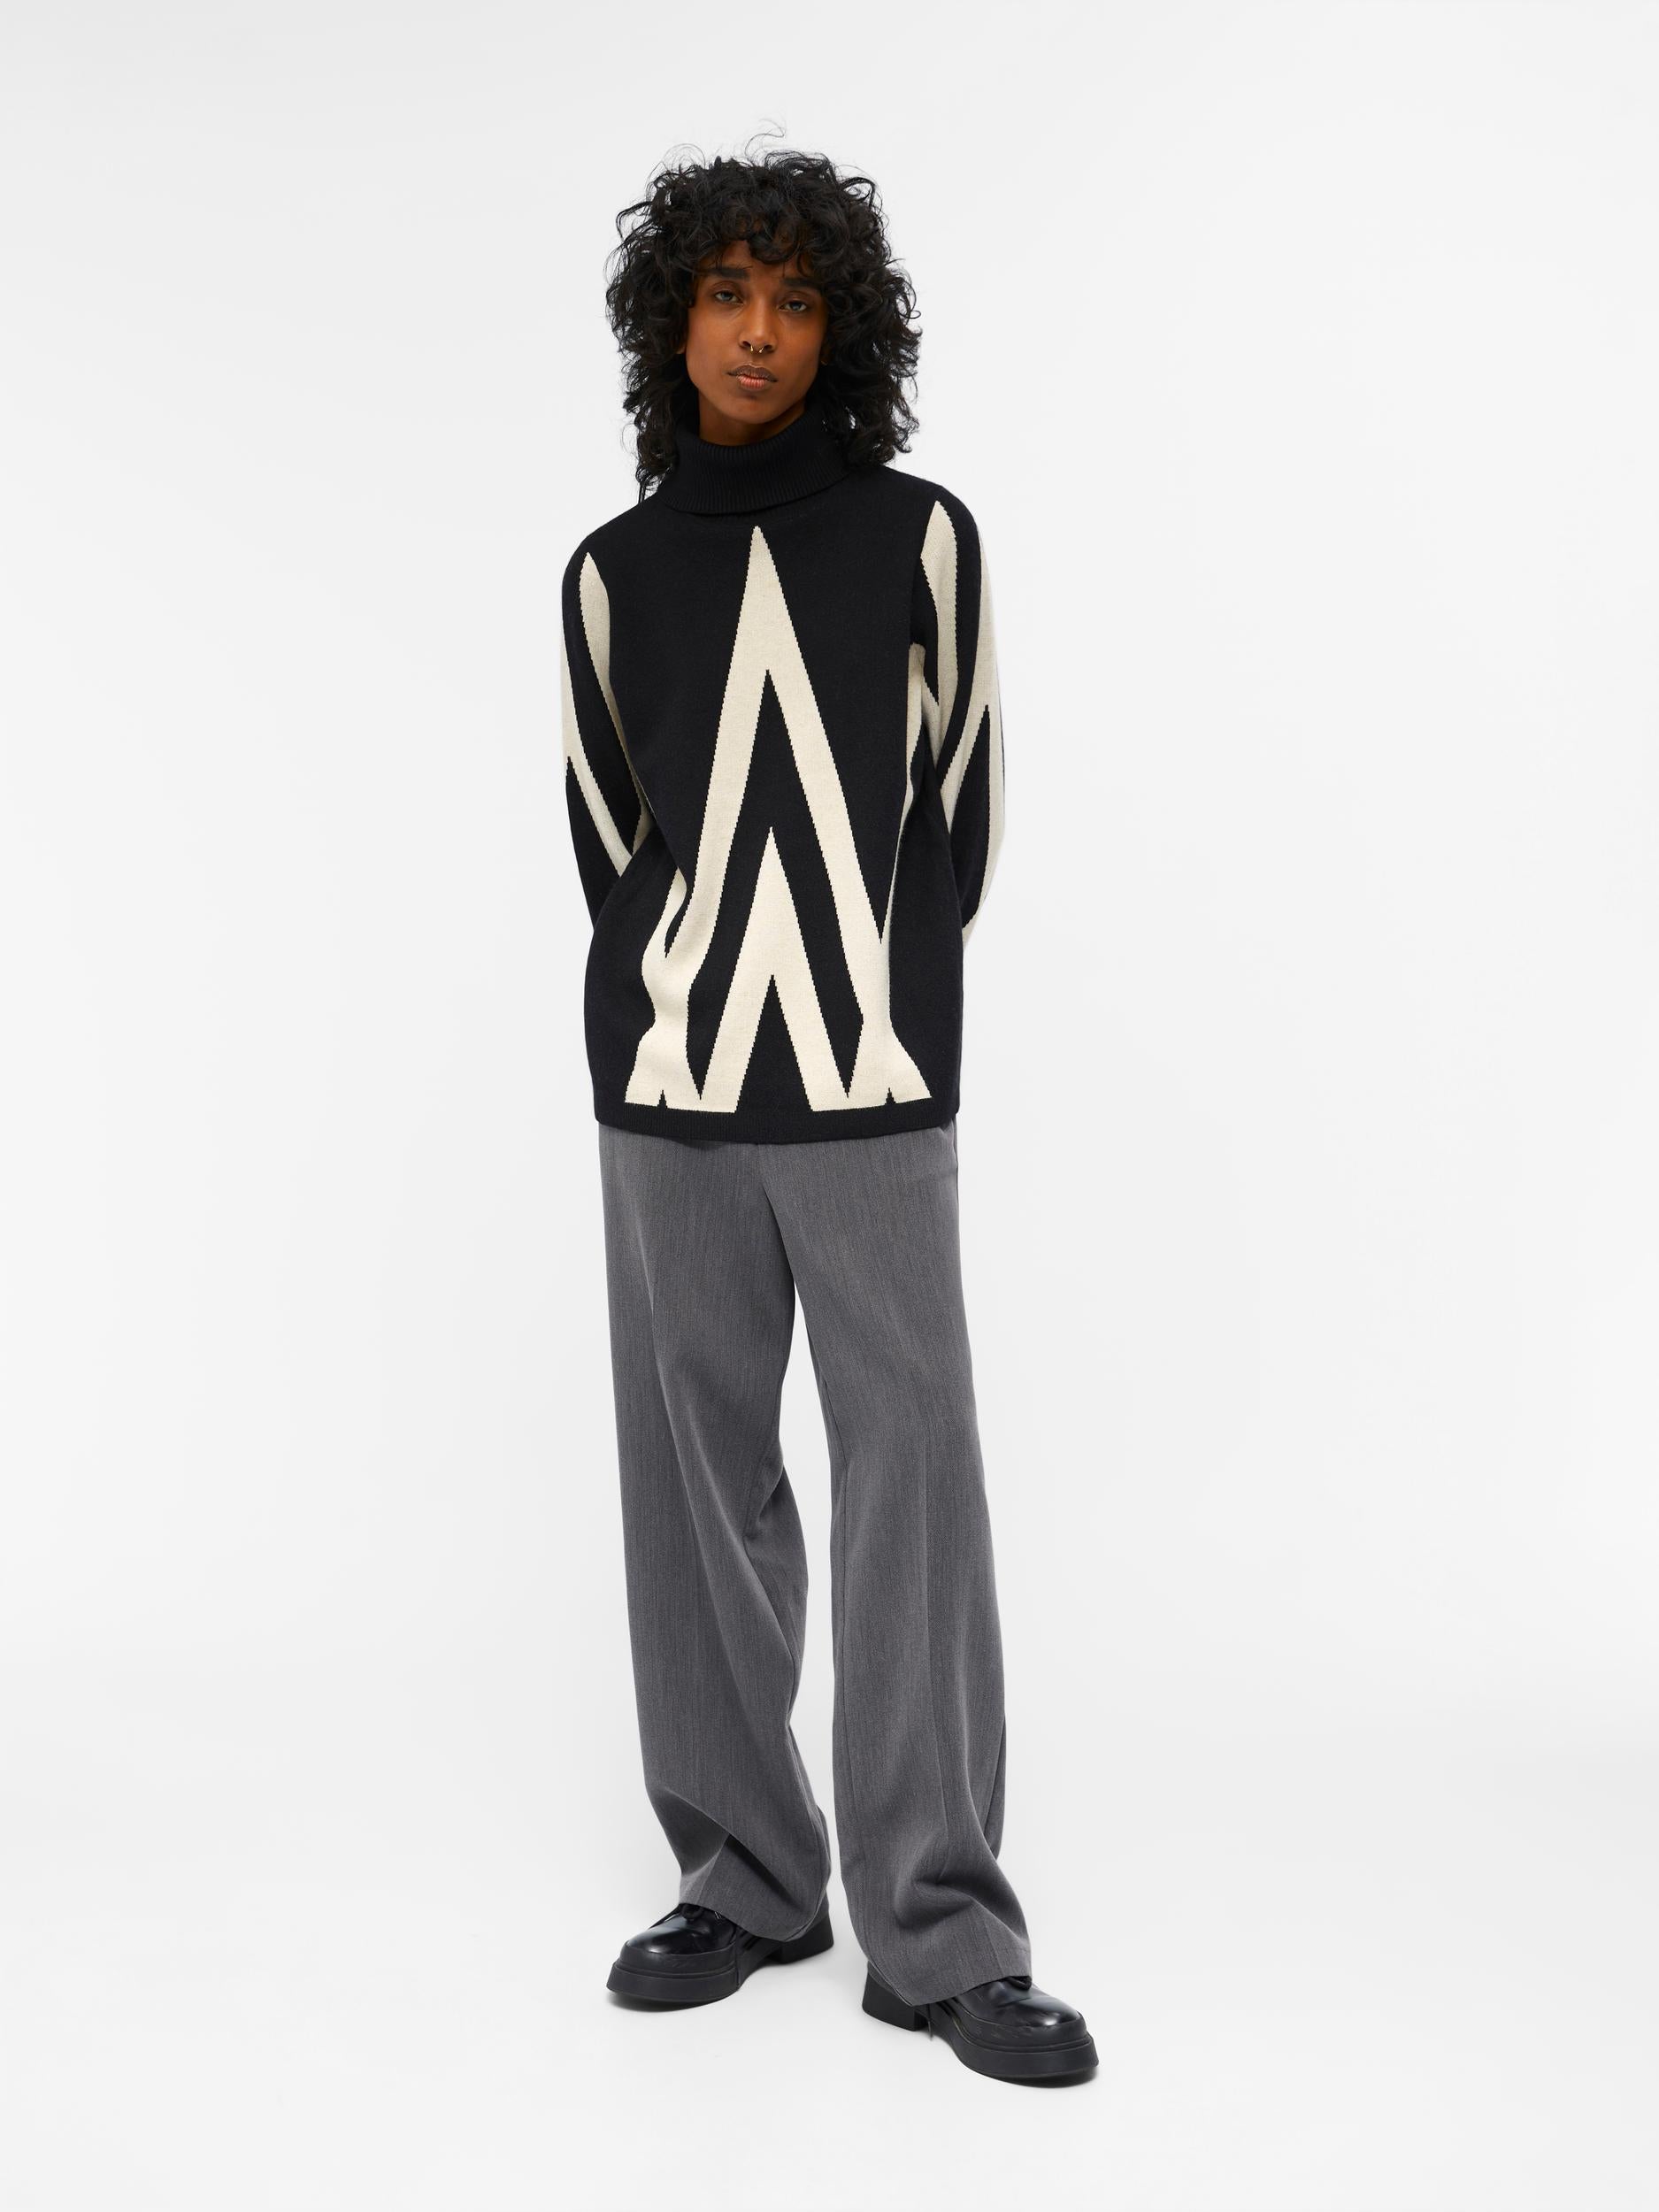 Object Ray Knit Rollneck Pullover, Black/creme